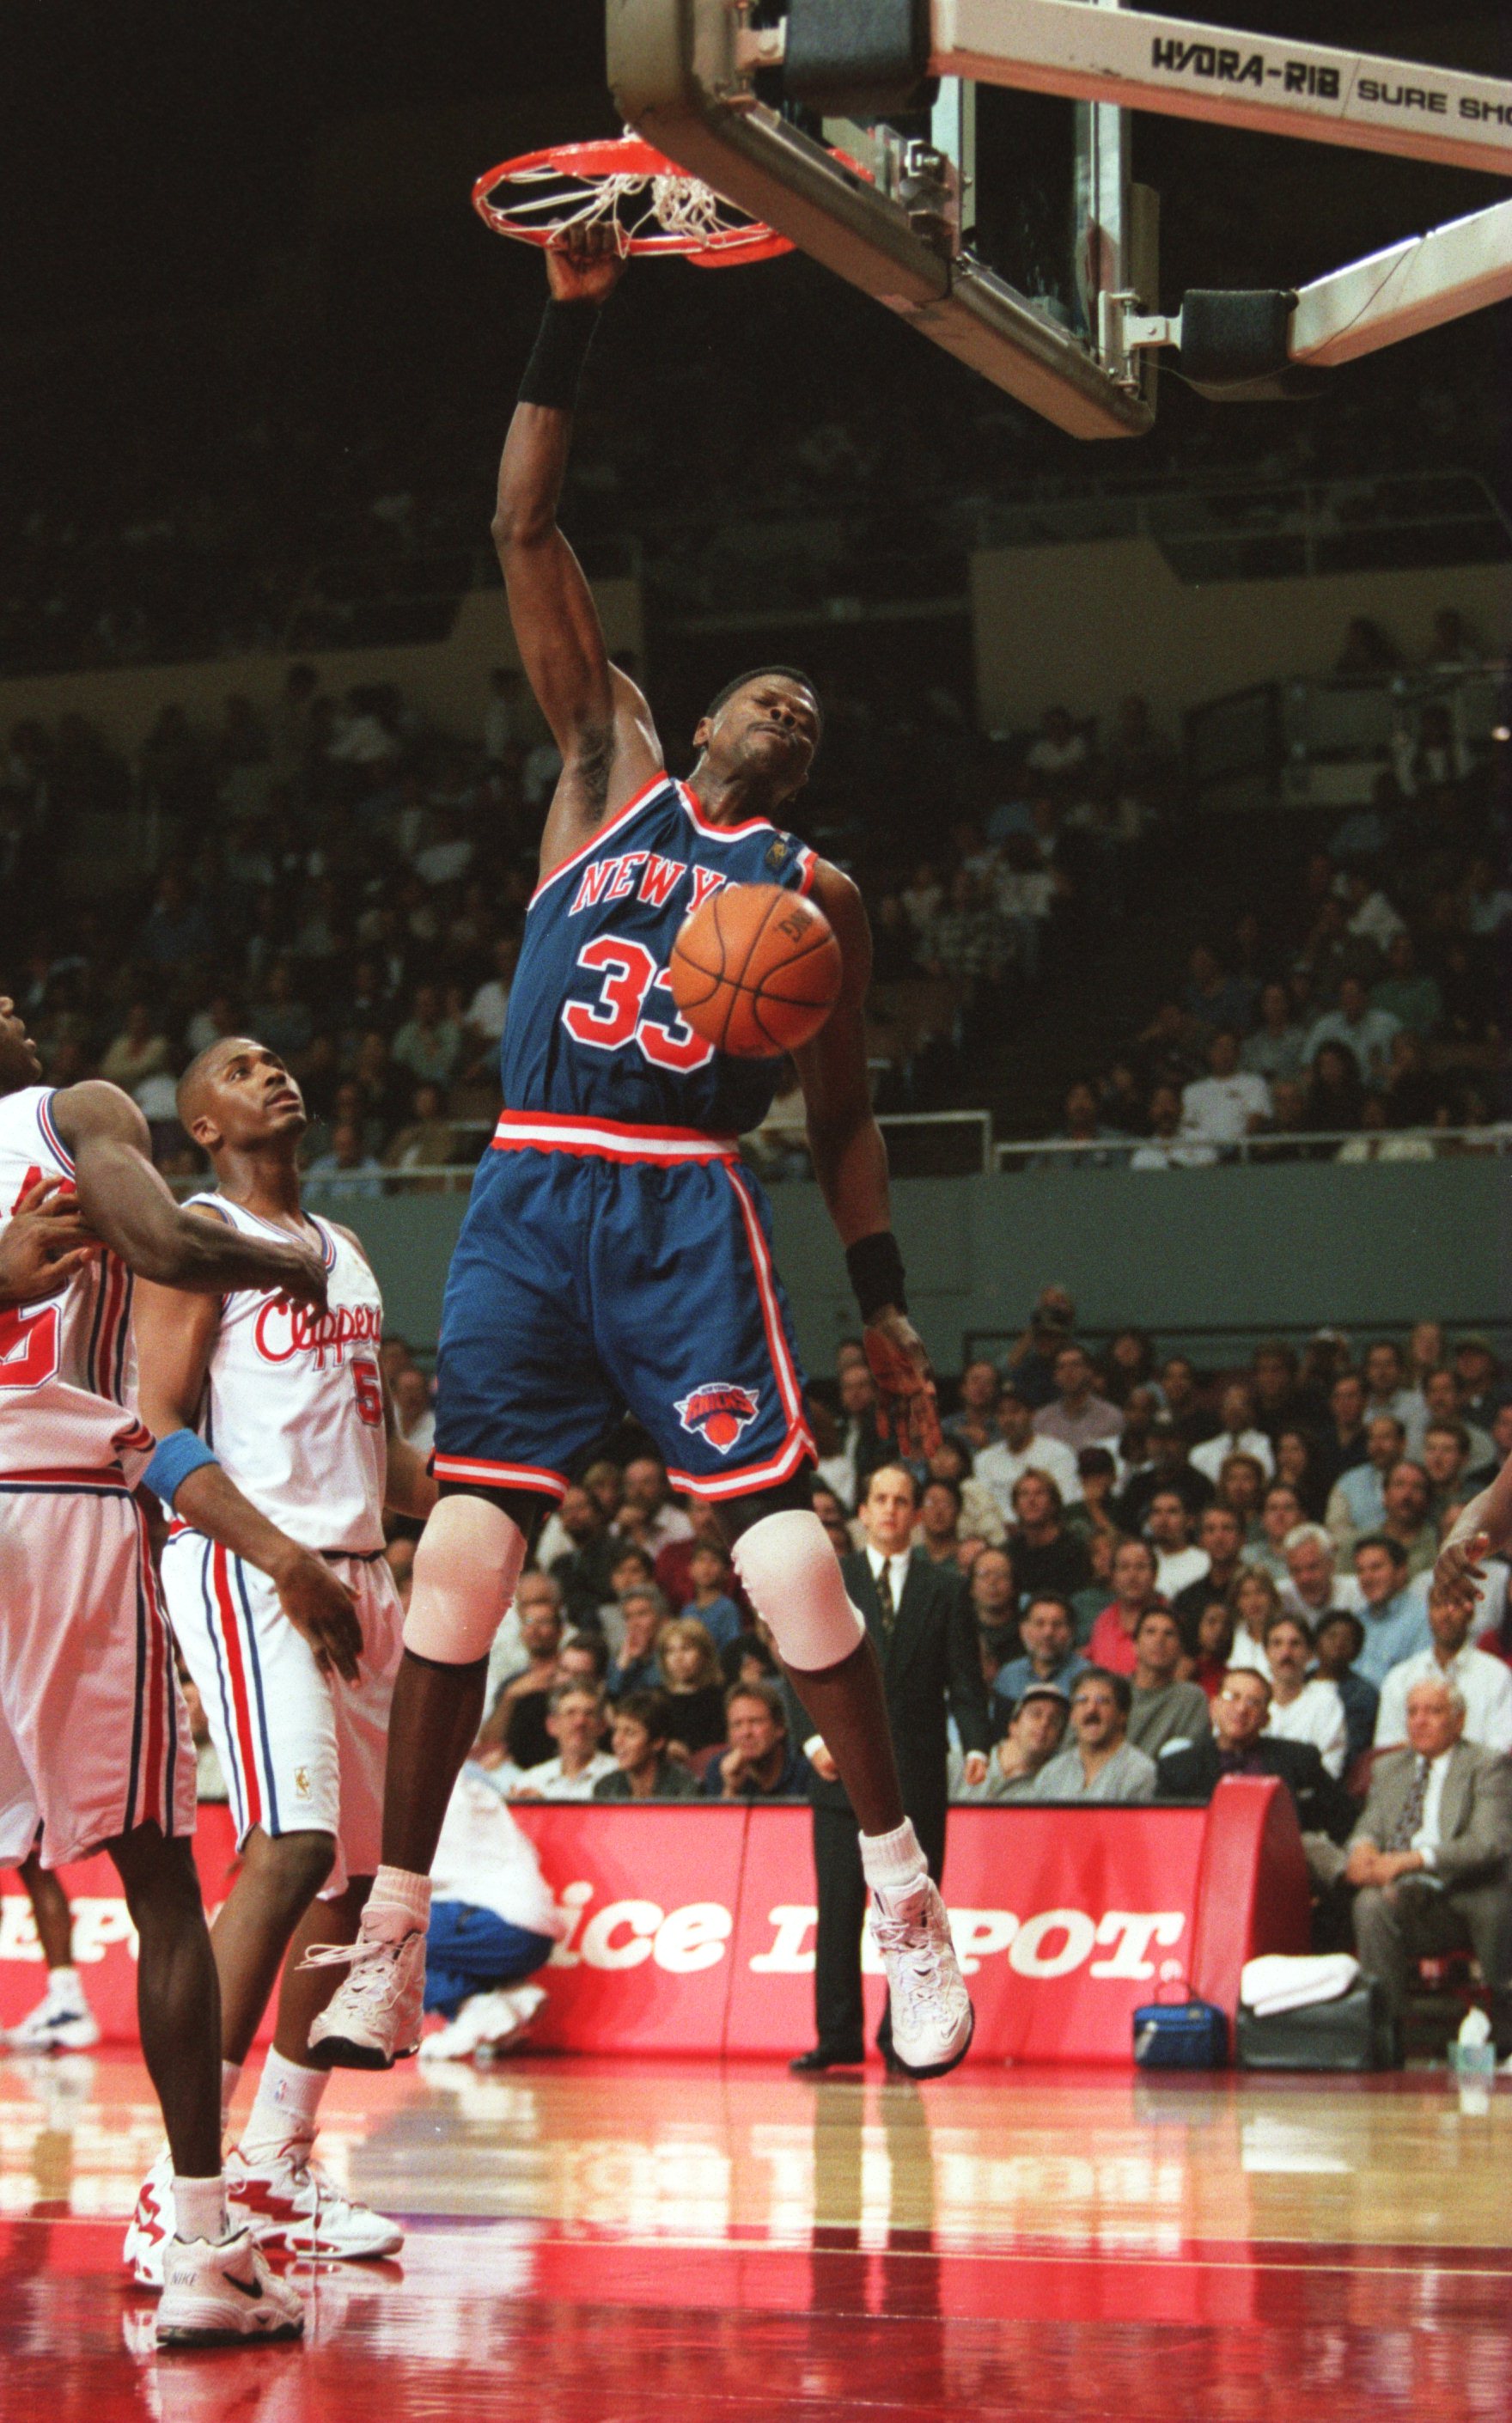 Patrick Ewing of the New York Knicks dunks the ball during the 1990